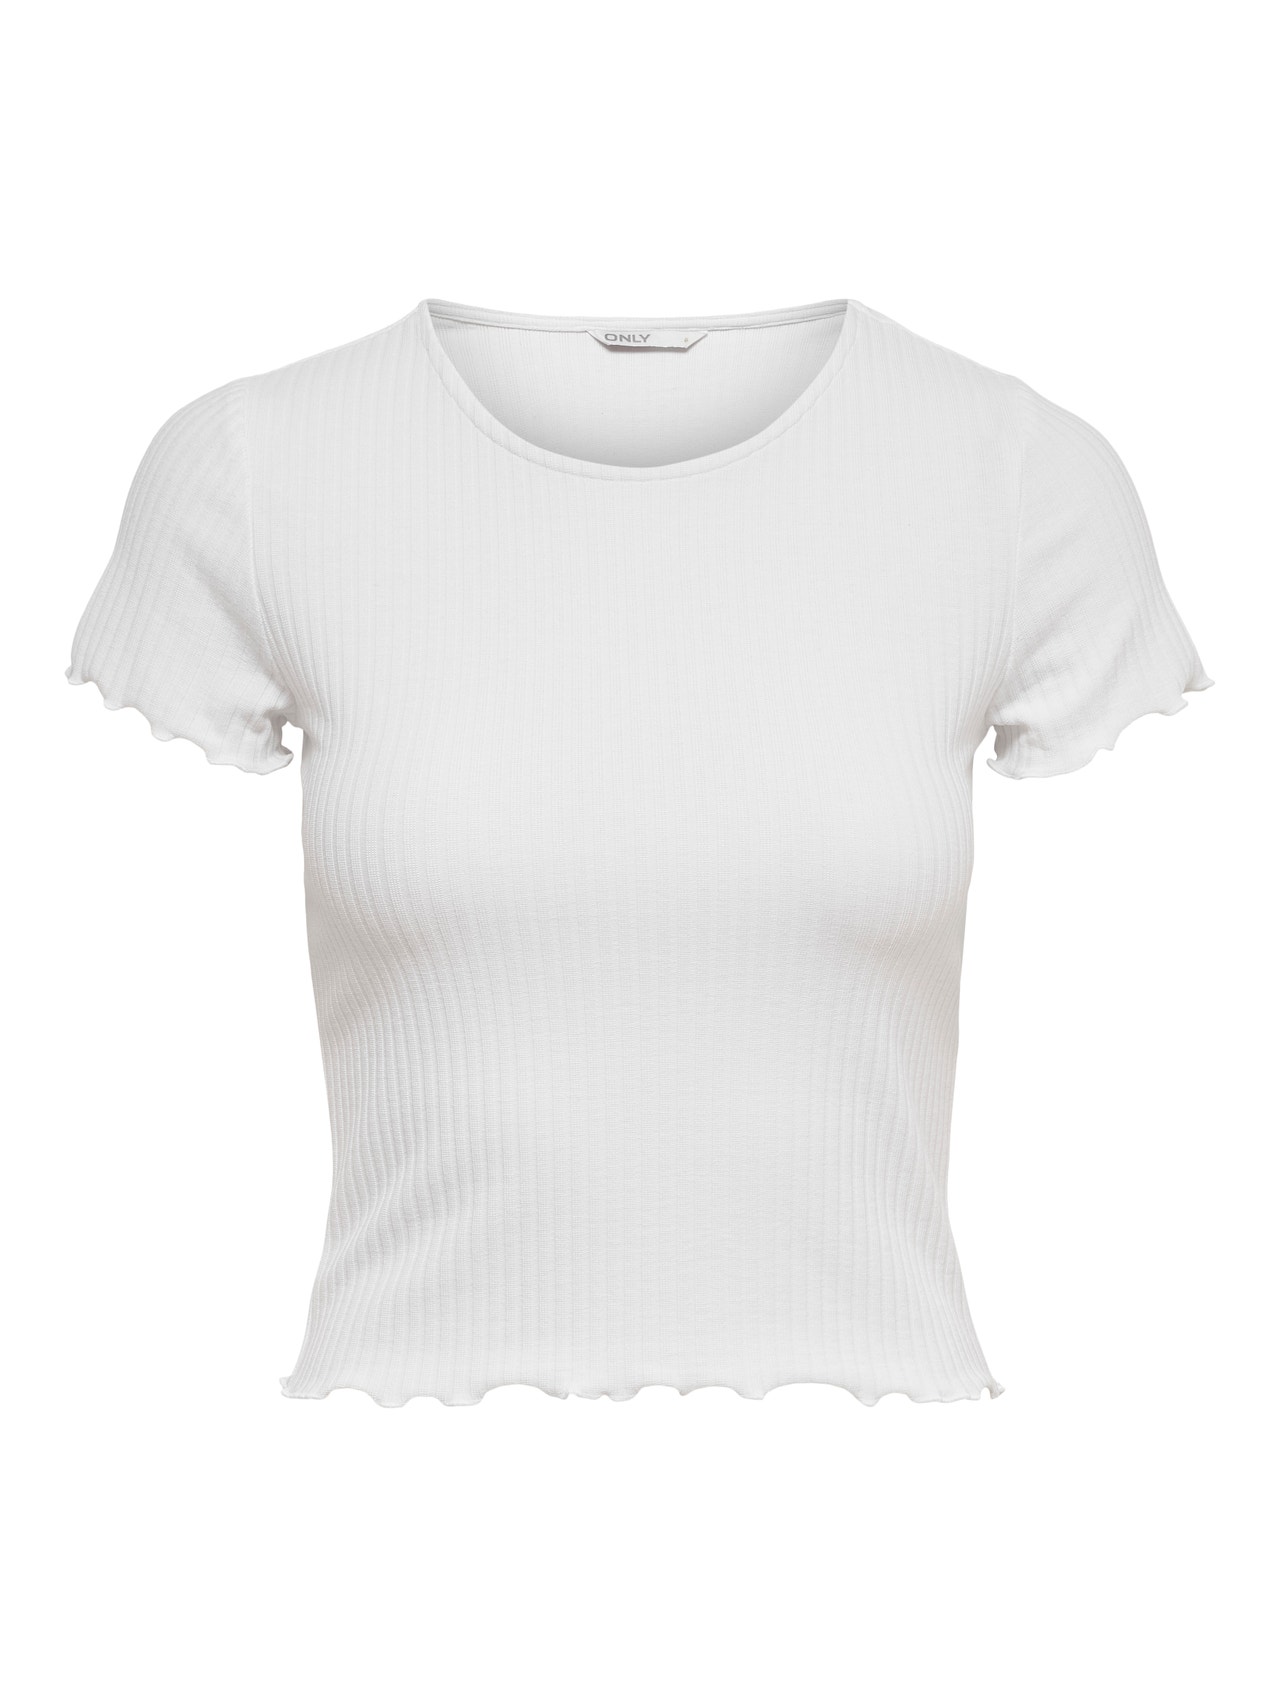 ONLY Regular Fit Round Neck T-Shirt -White - 15201206